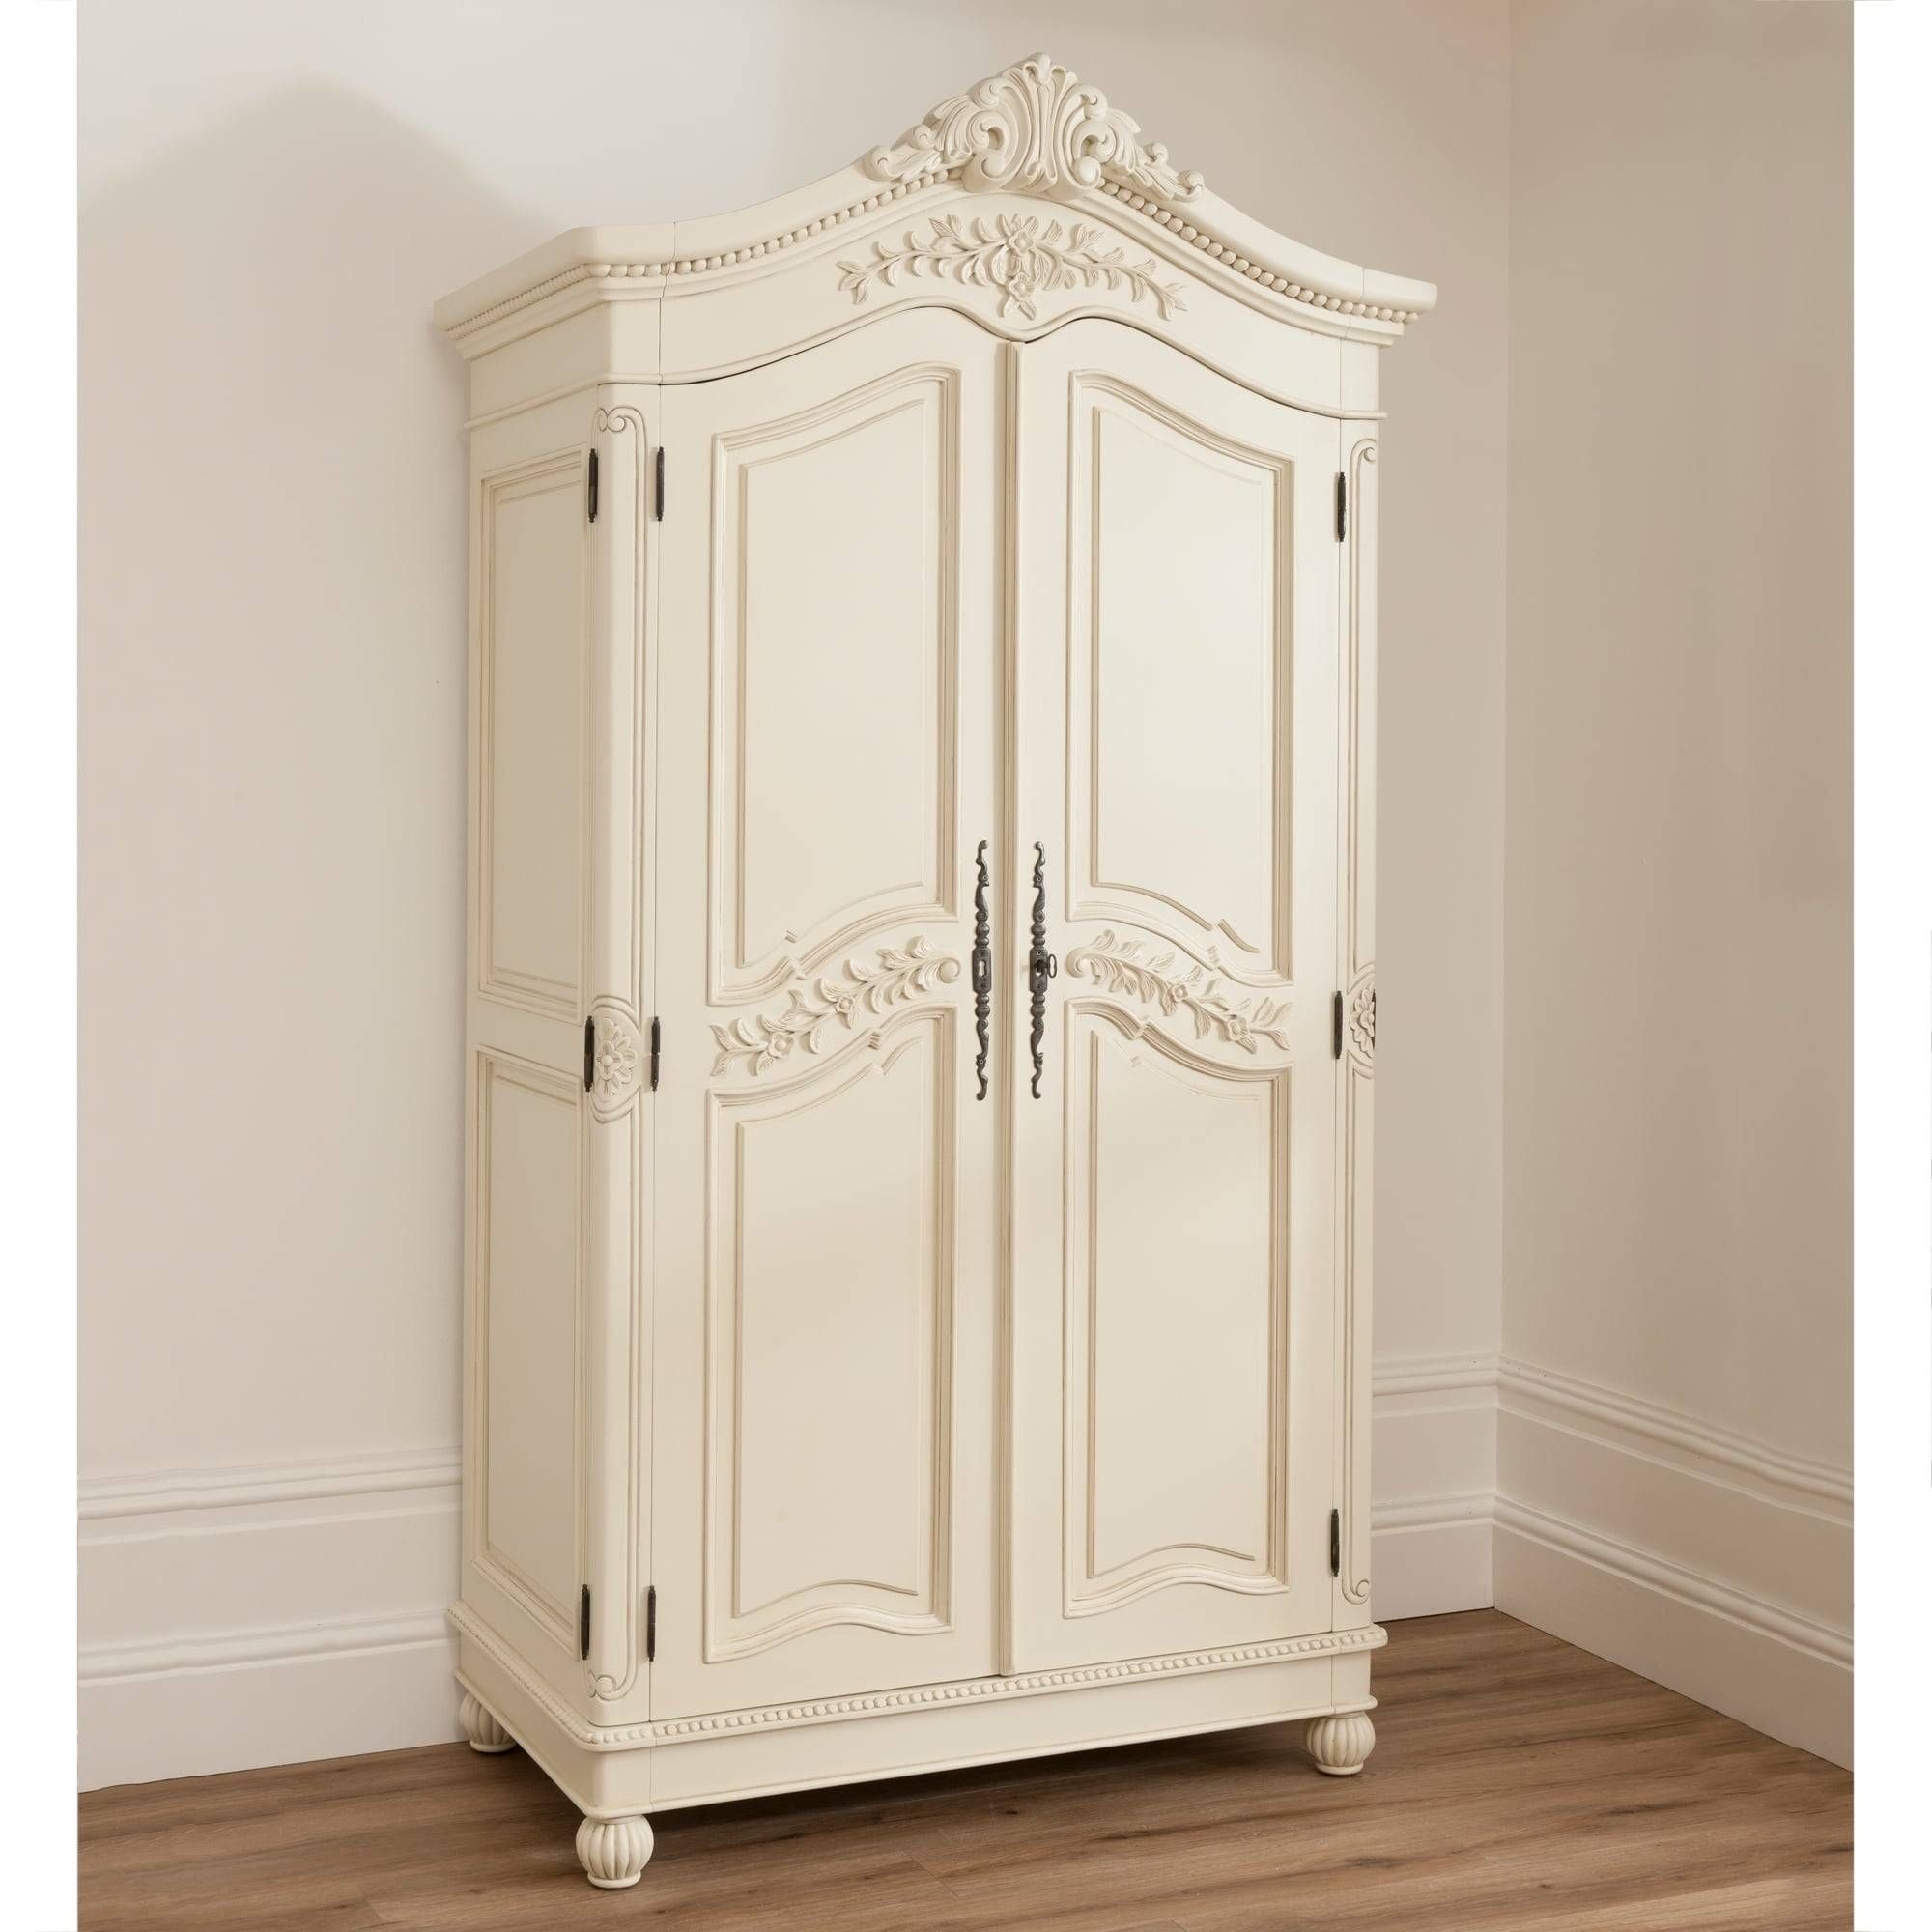 Bordeaux Ivory Shabby Chic Wardrobe | Shabby Chic Furniture Throughout French Style Armoires Wardrobes (View 5 of 15)